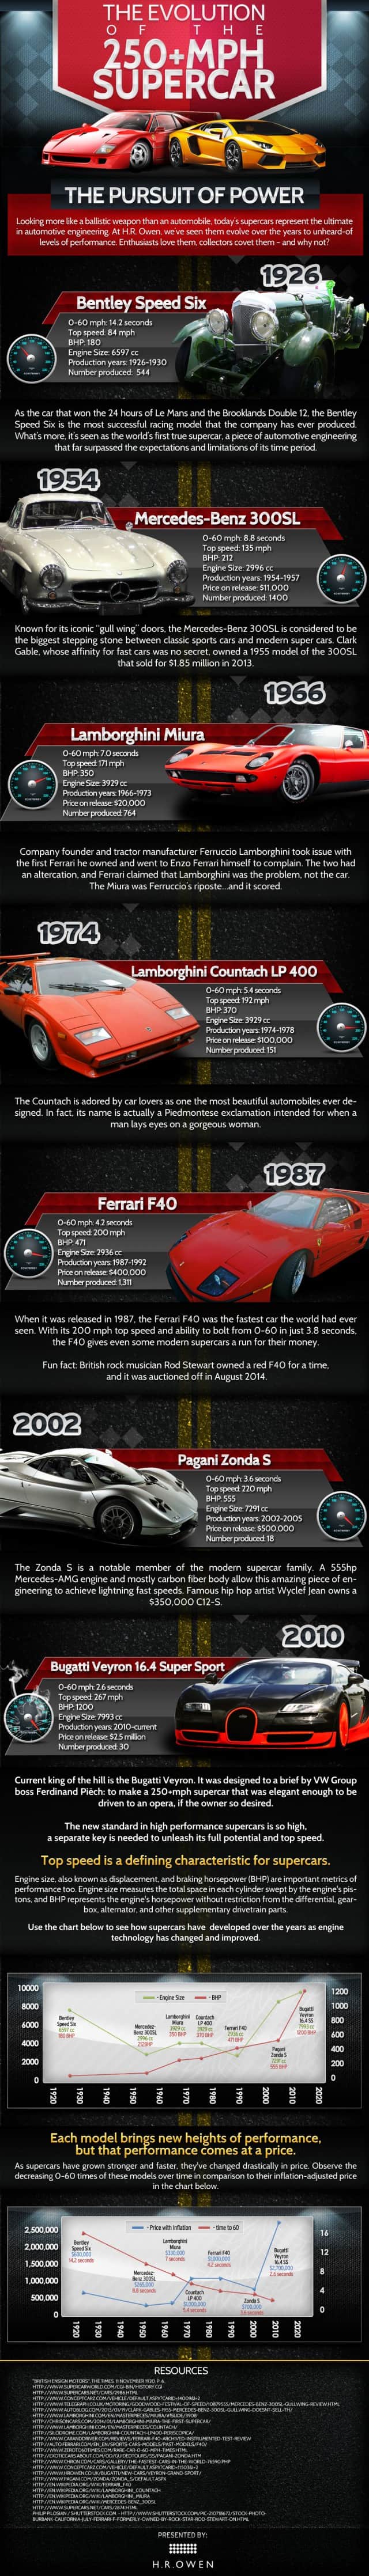 Evolution of the 250+ MPH Supercar Infographic